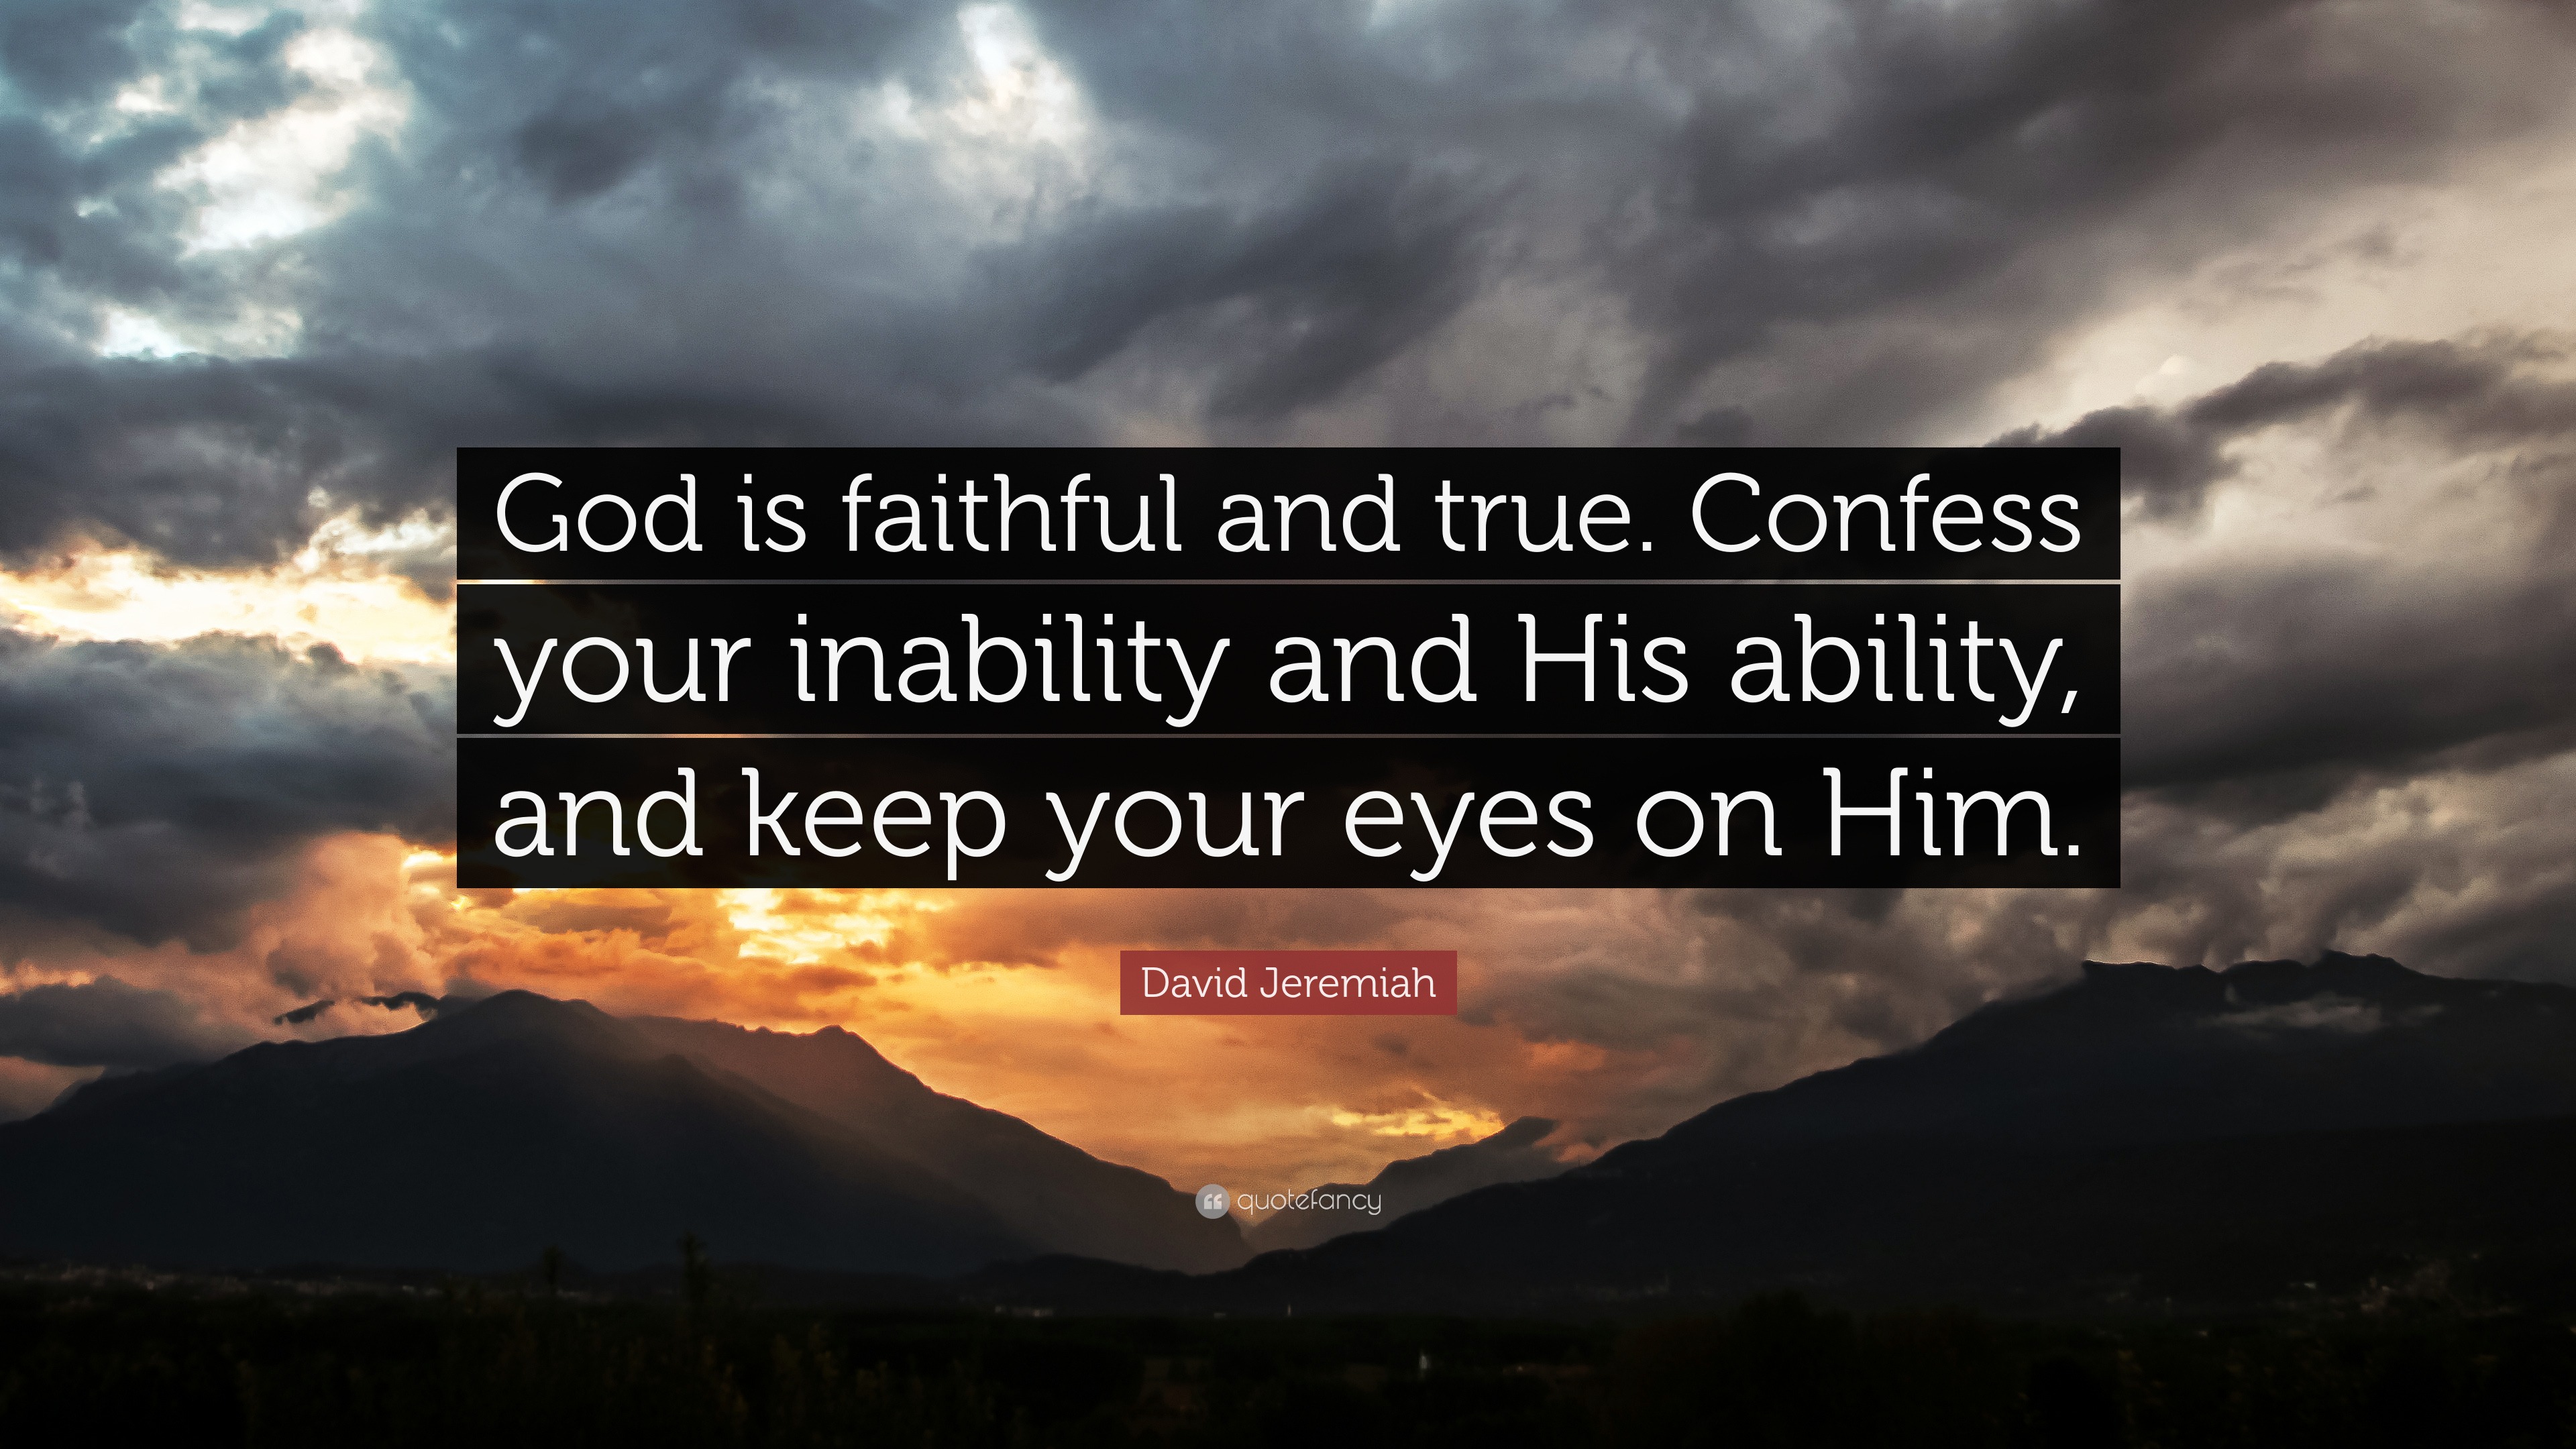 David Jeremiah Quote: “God is faithful and true. Confess your inability ...